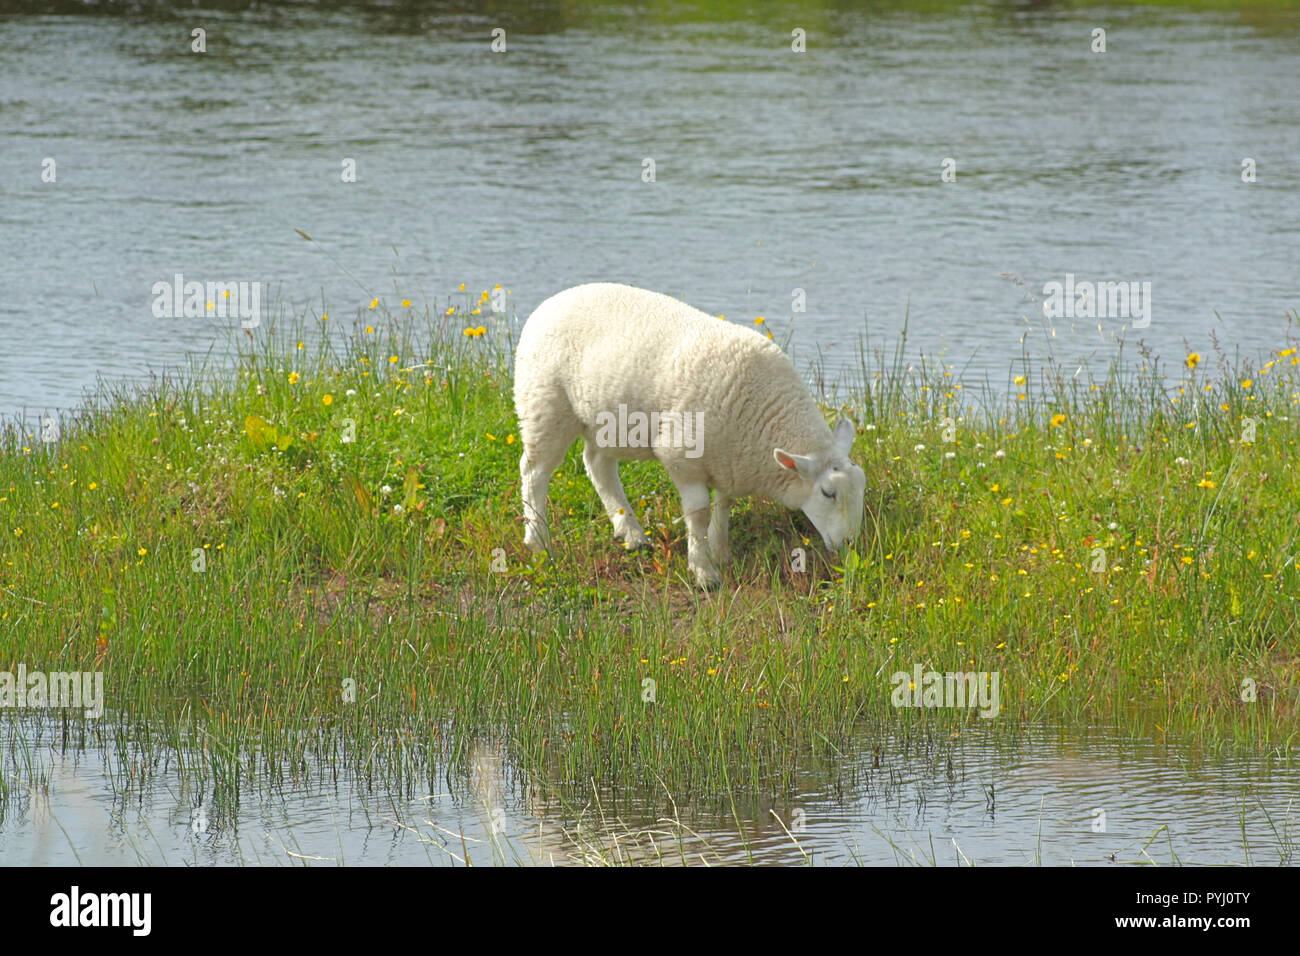 Small lamb grazing on an island of grass on a lake iwith reflection in water Stock Photo